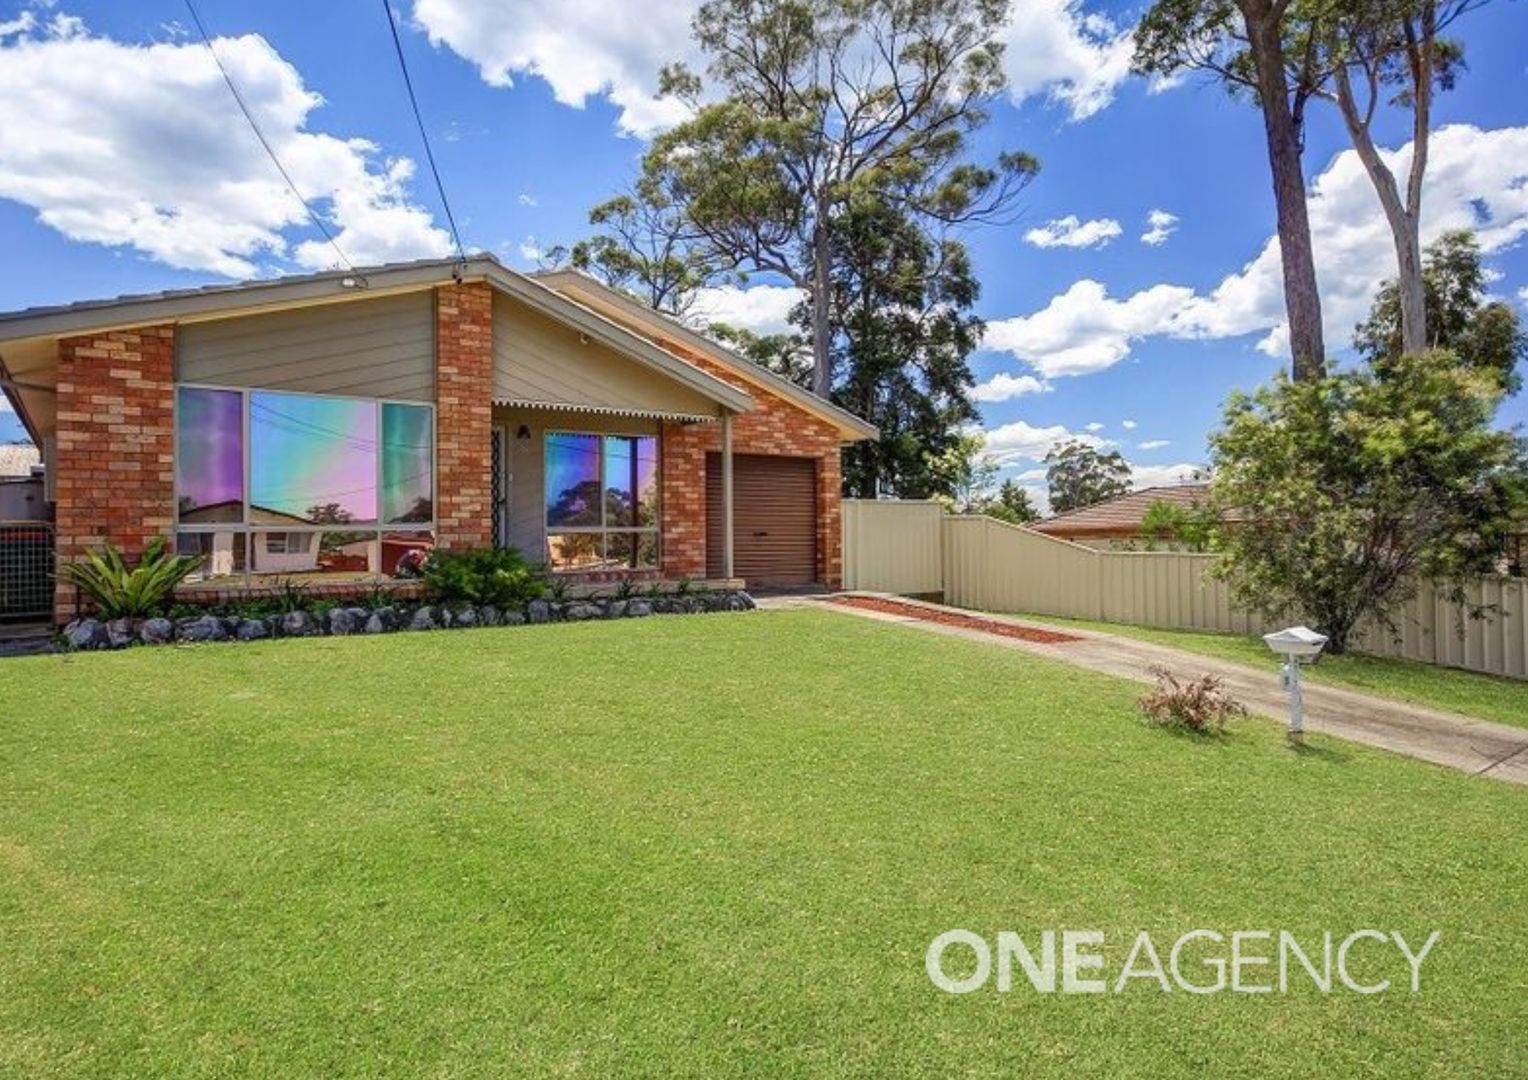 3 bedrooms House in 25 Warrego Drive SANCTUARY POINT NSW, 2540